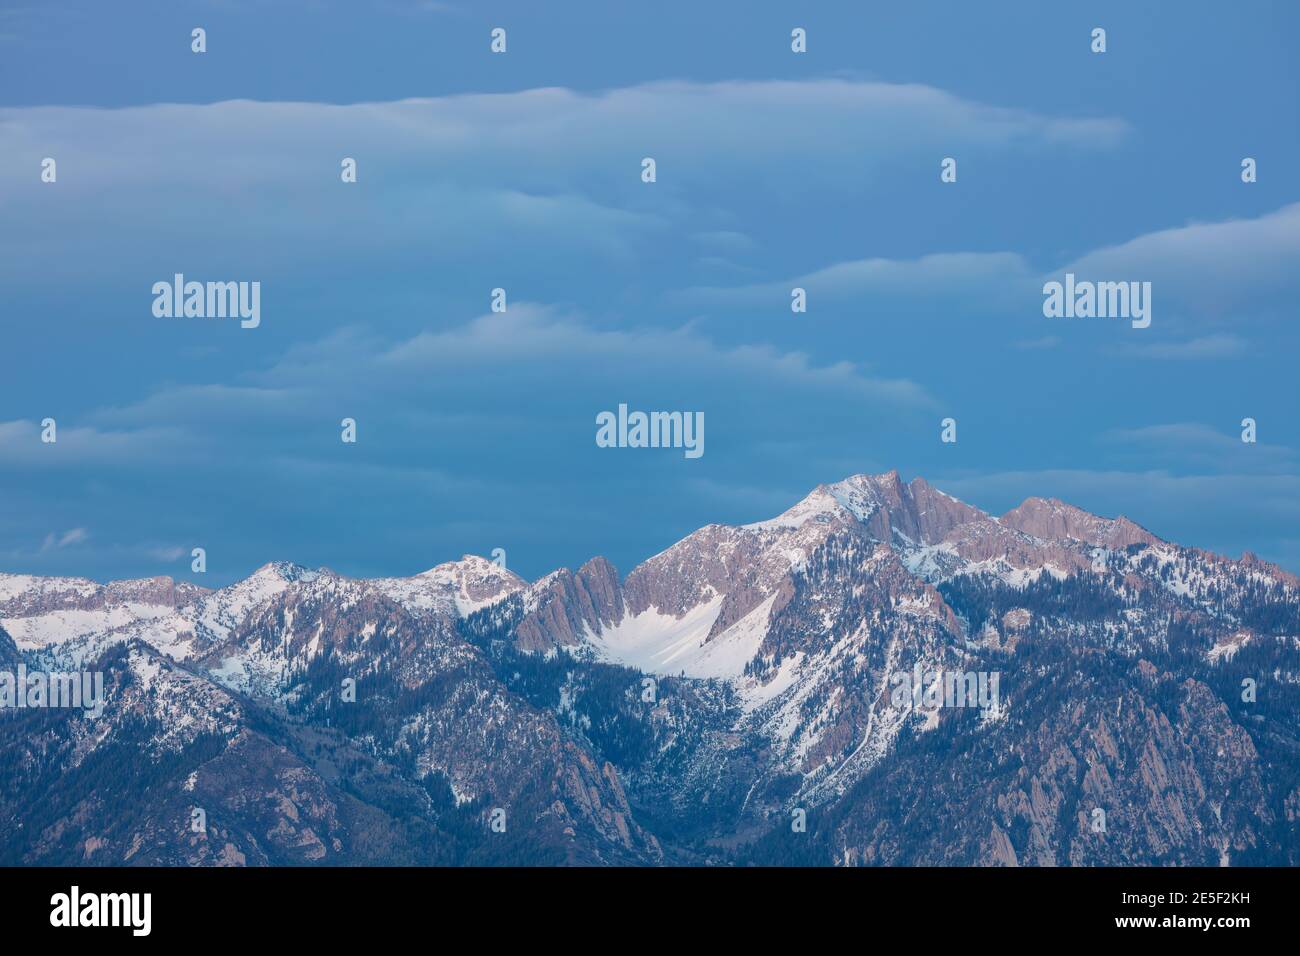 Snow capped Wasatch Mountains at dusk, Salt Lake County, Utah Stock Photo